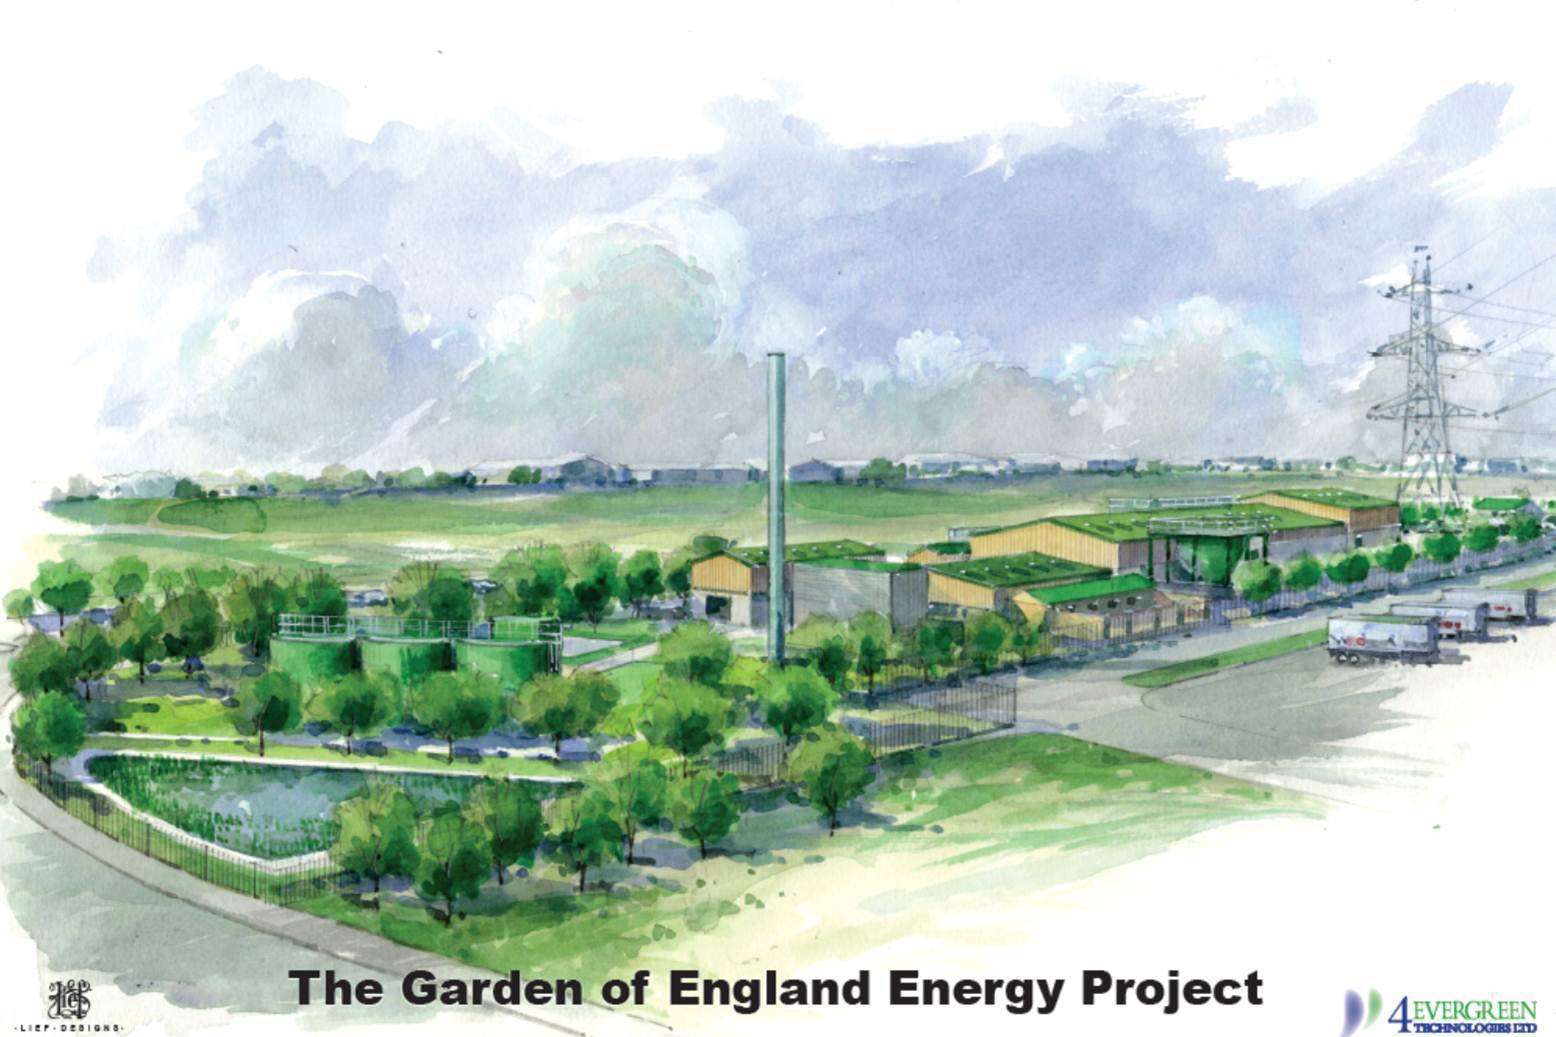 4Evergreen Technologies vision for its Garden of England project